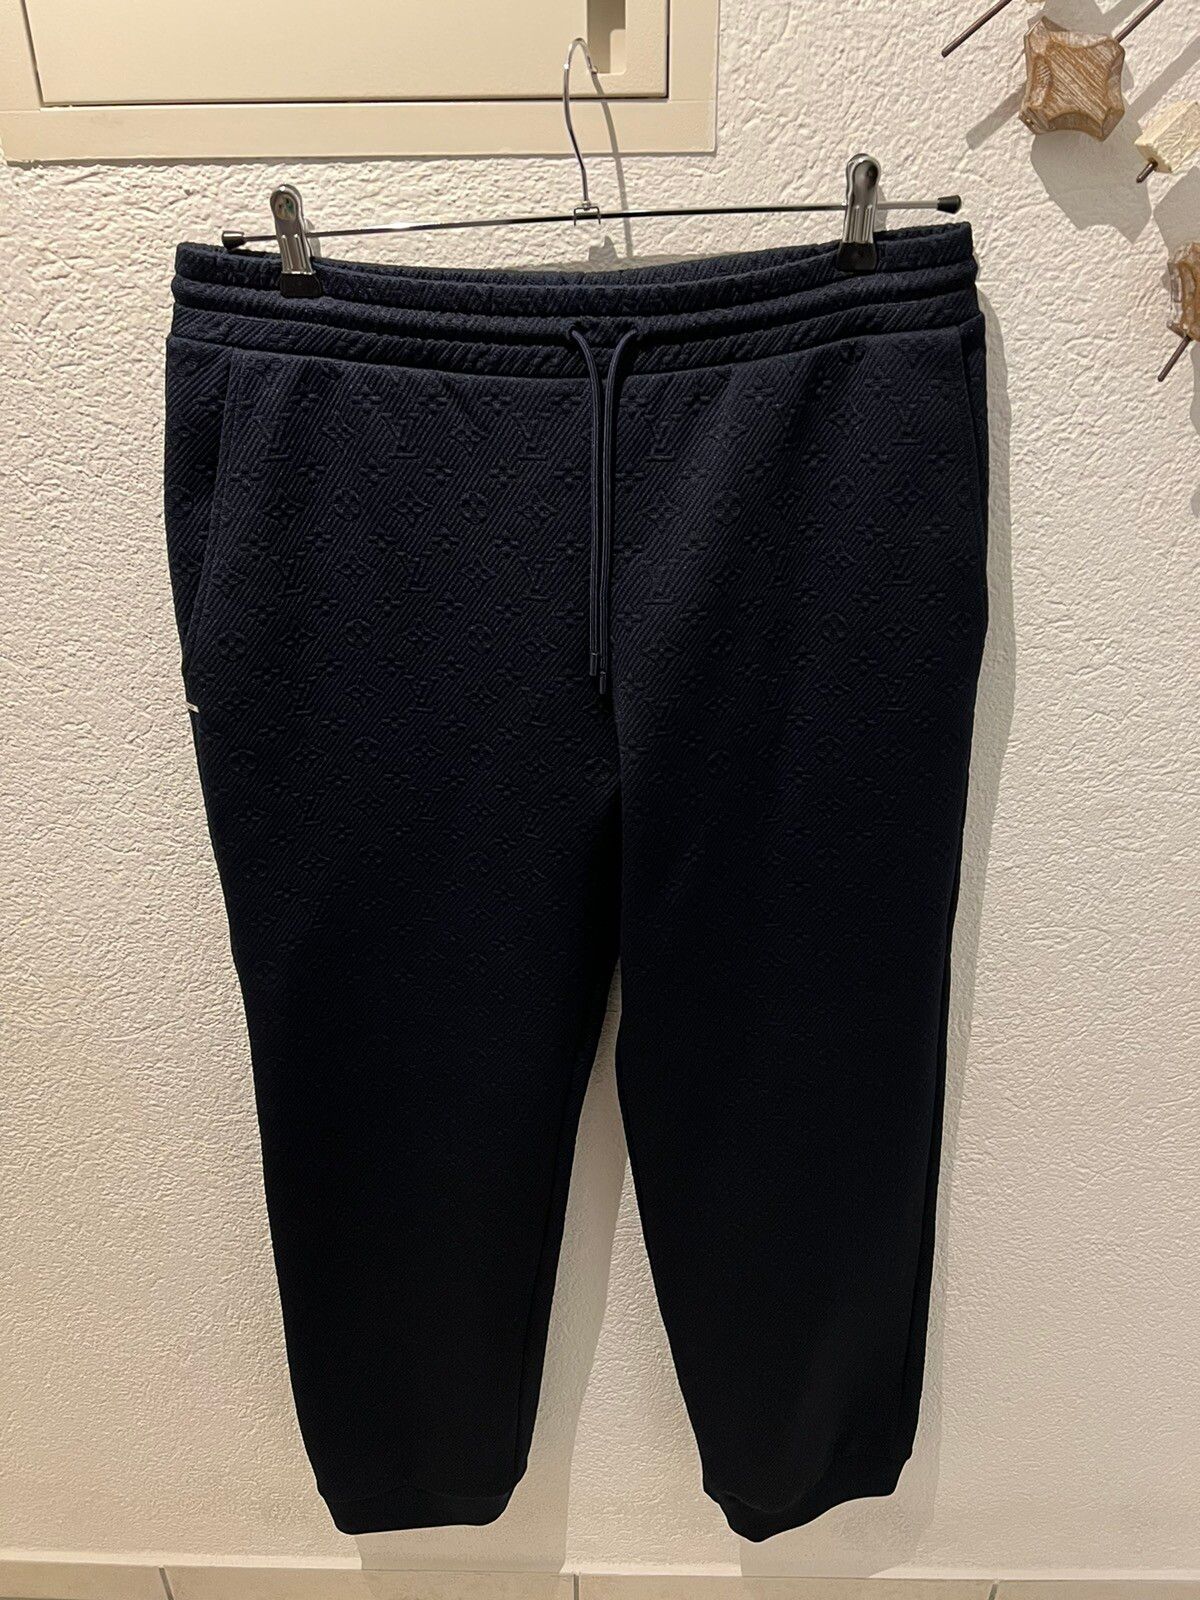 Louis Vuitton Monogram Mens Joggers & Sweatpants, Navy, L*Inventory Confirmation Required